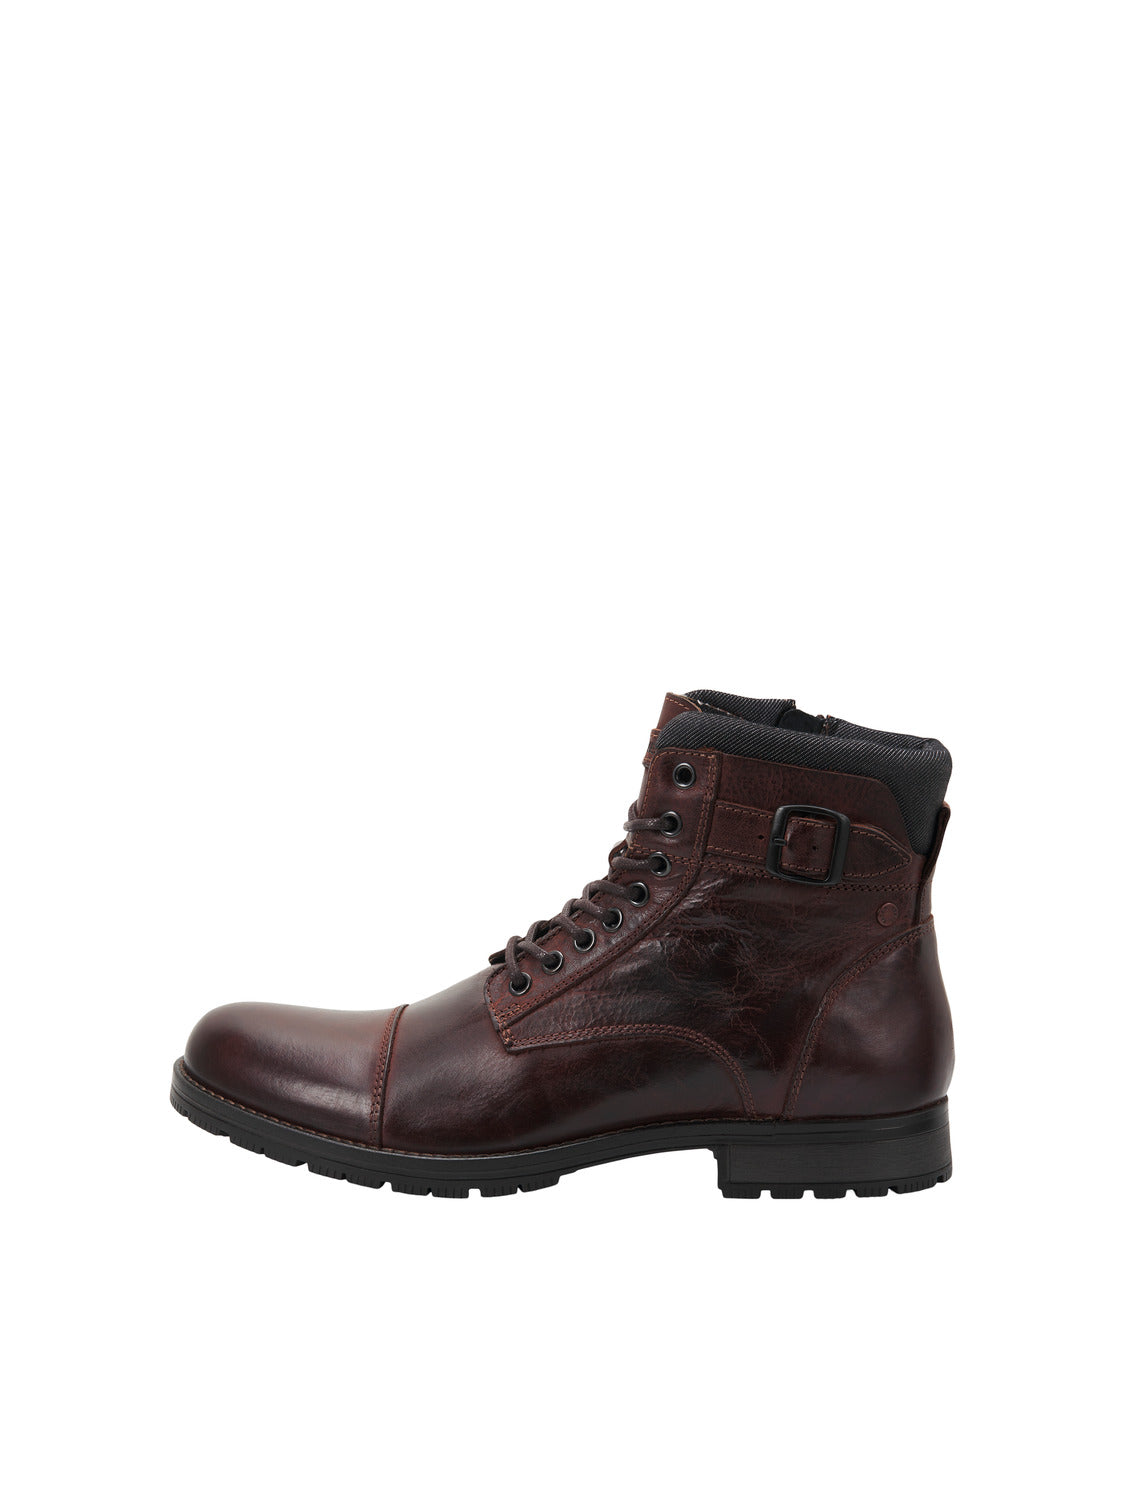 JFWALBANY Boots - brown stone